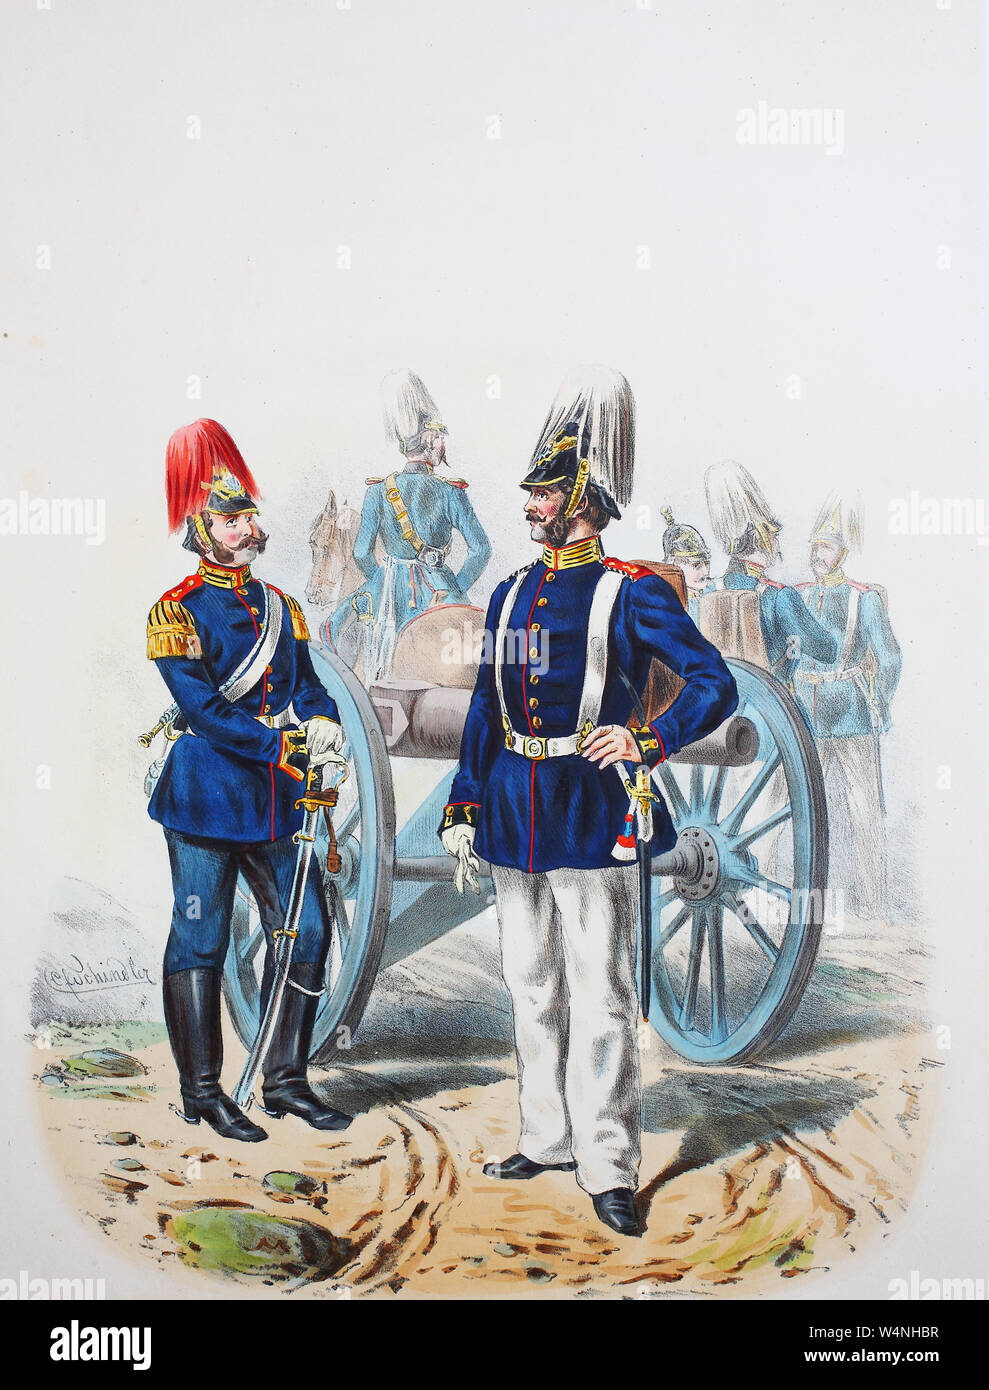 Royal Prussian Army, Guards Corps, Preußens Heer, preussische Garde, 2. Garde Feld Artillerie Regiment, Stabstrompeter, einjähriger Freiwilliger, Digital improved reproduction of an illustration from the 19th century Stock Photo